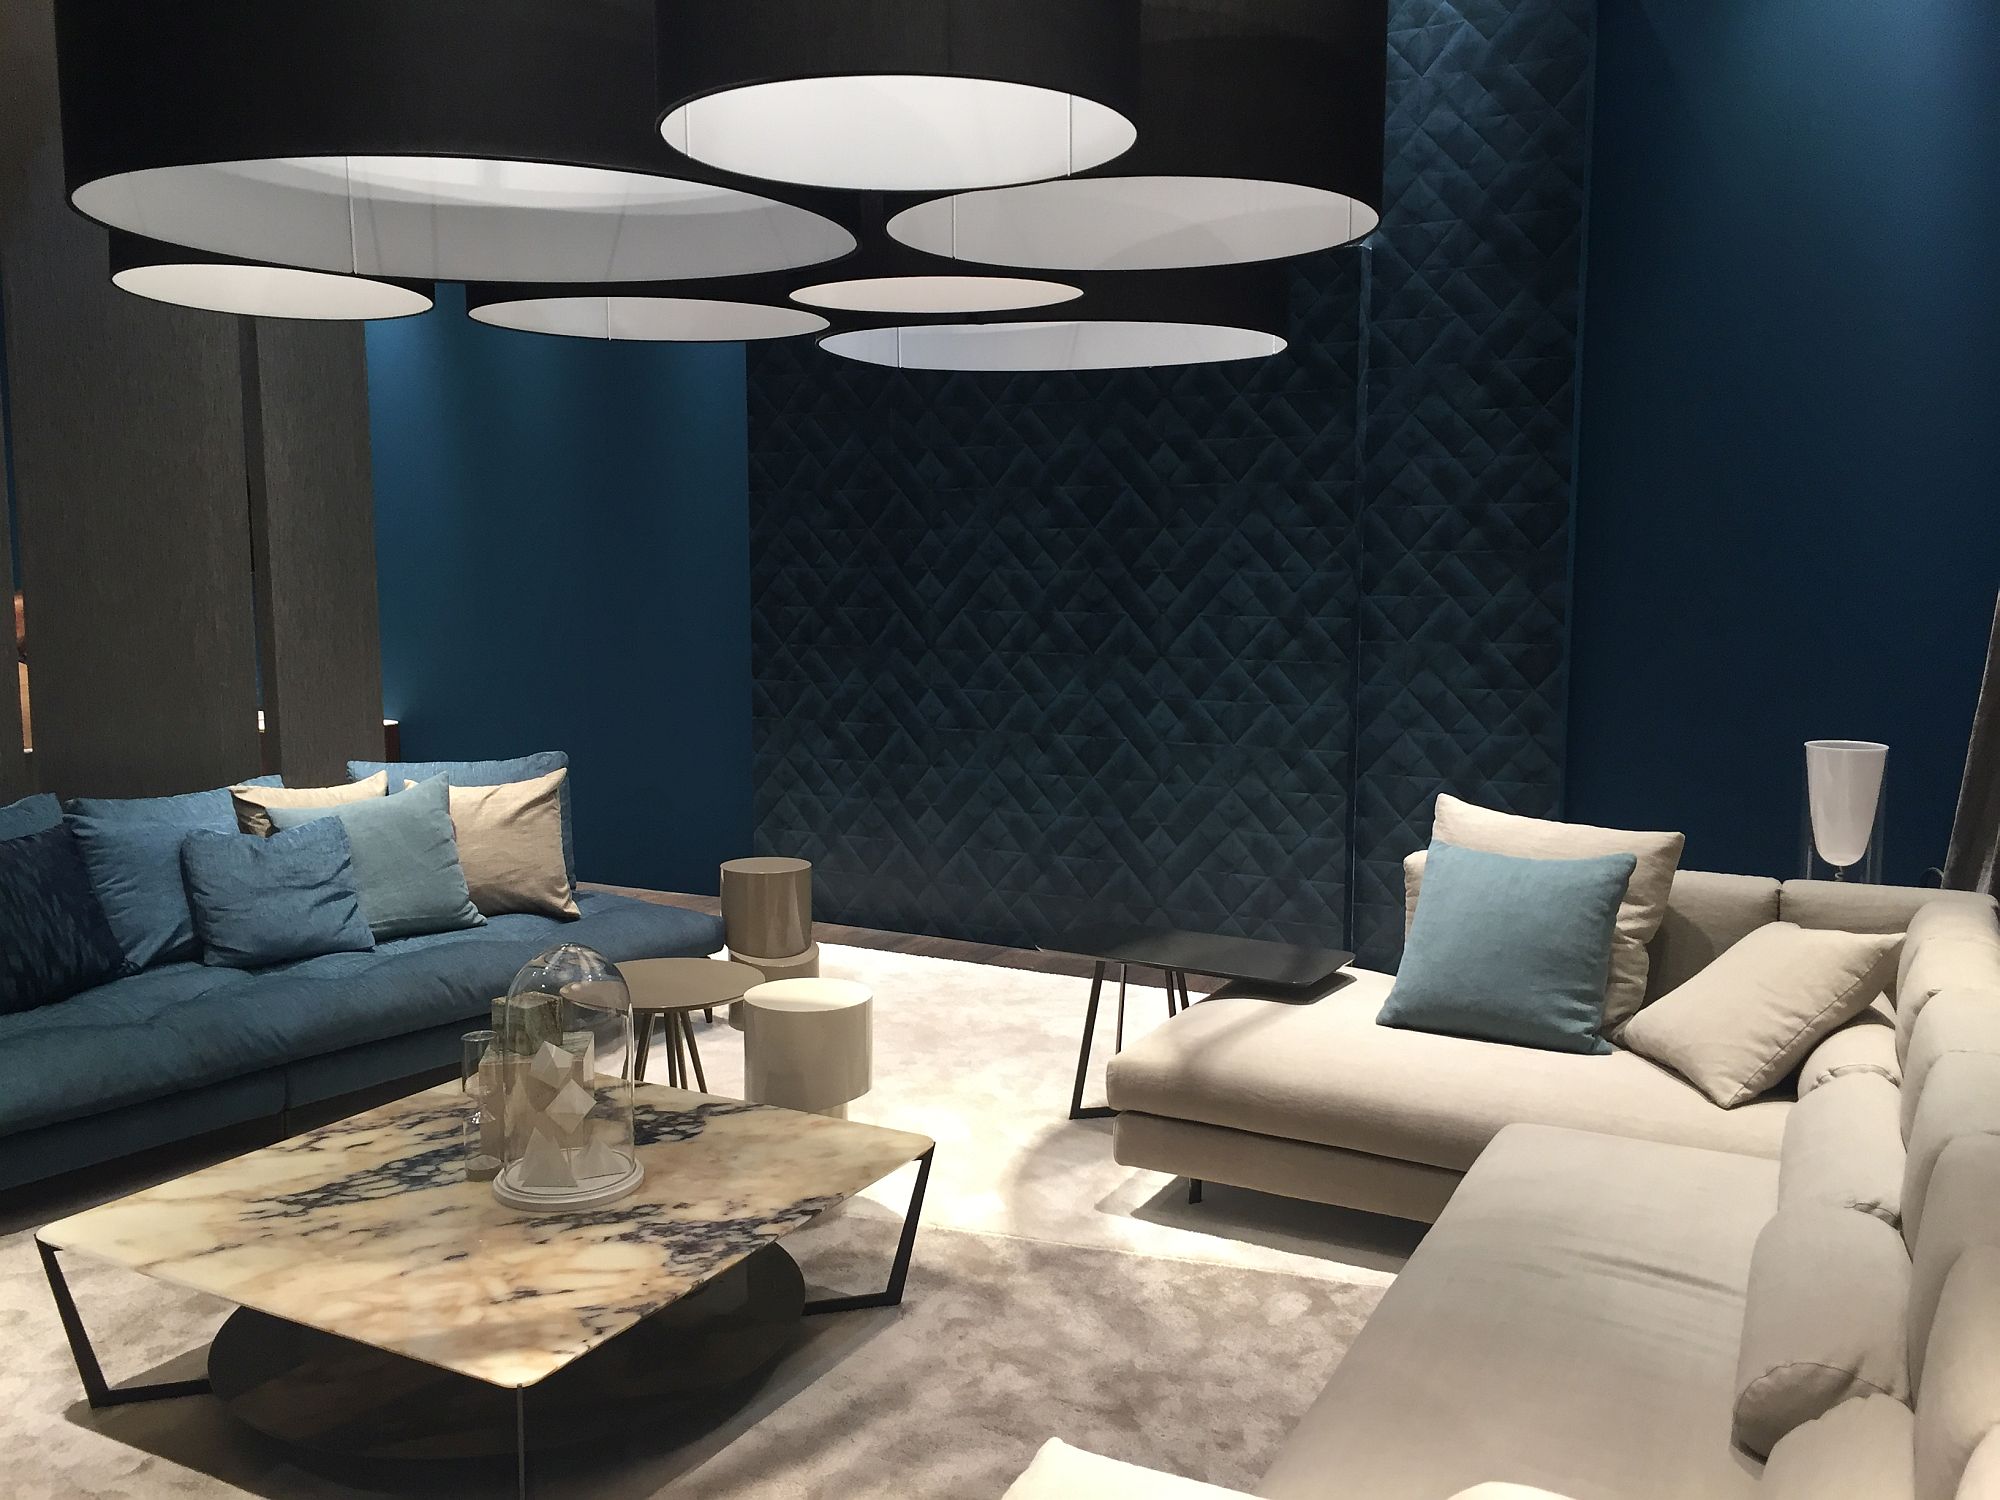 Living room sofas in blue are a popular choice in homes across the globe